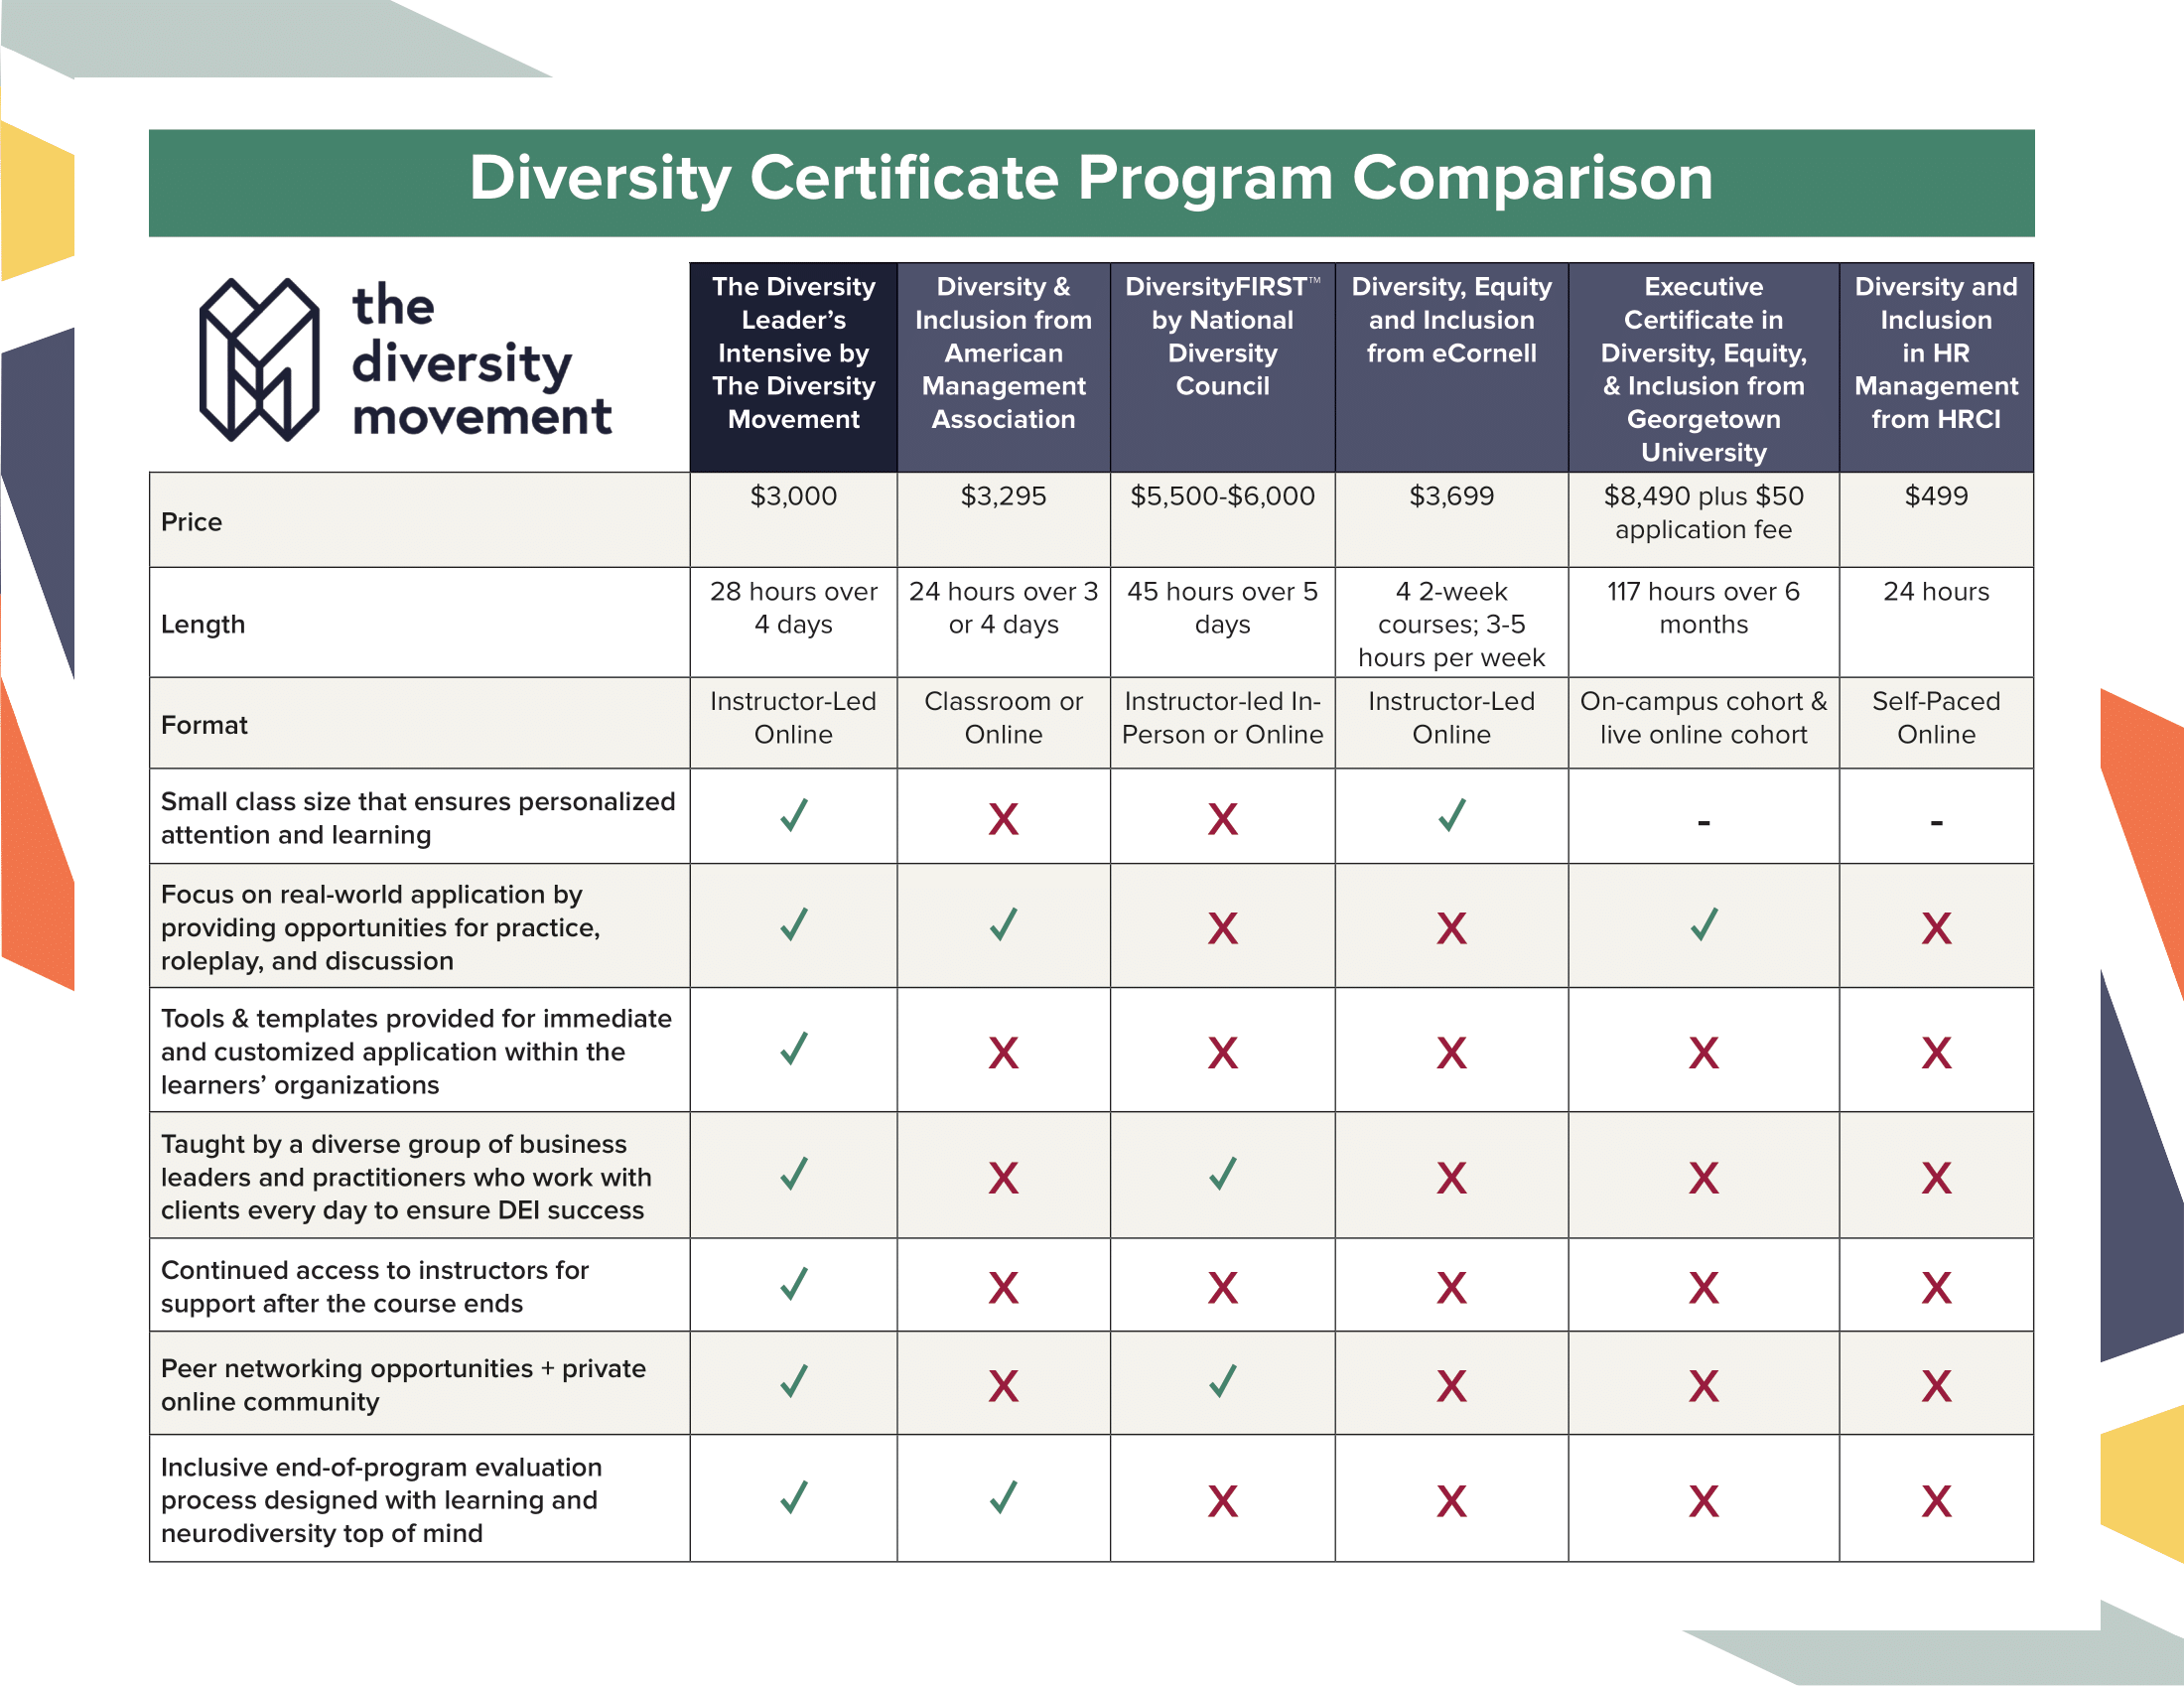 chart comparing the features of common diversity certification programs